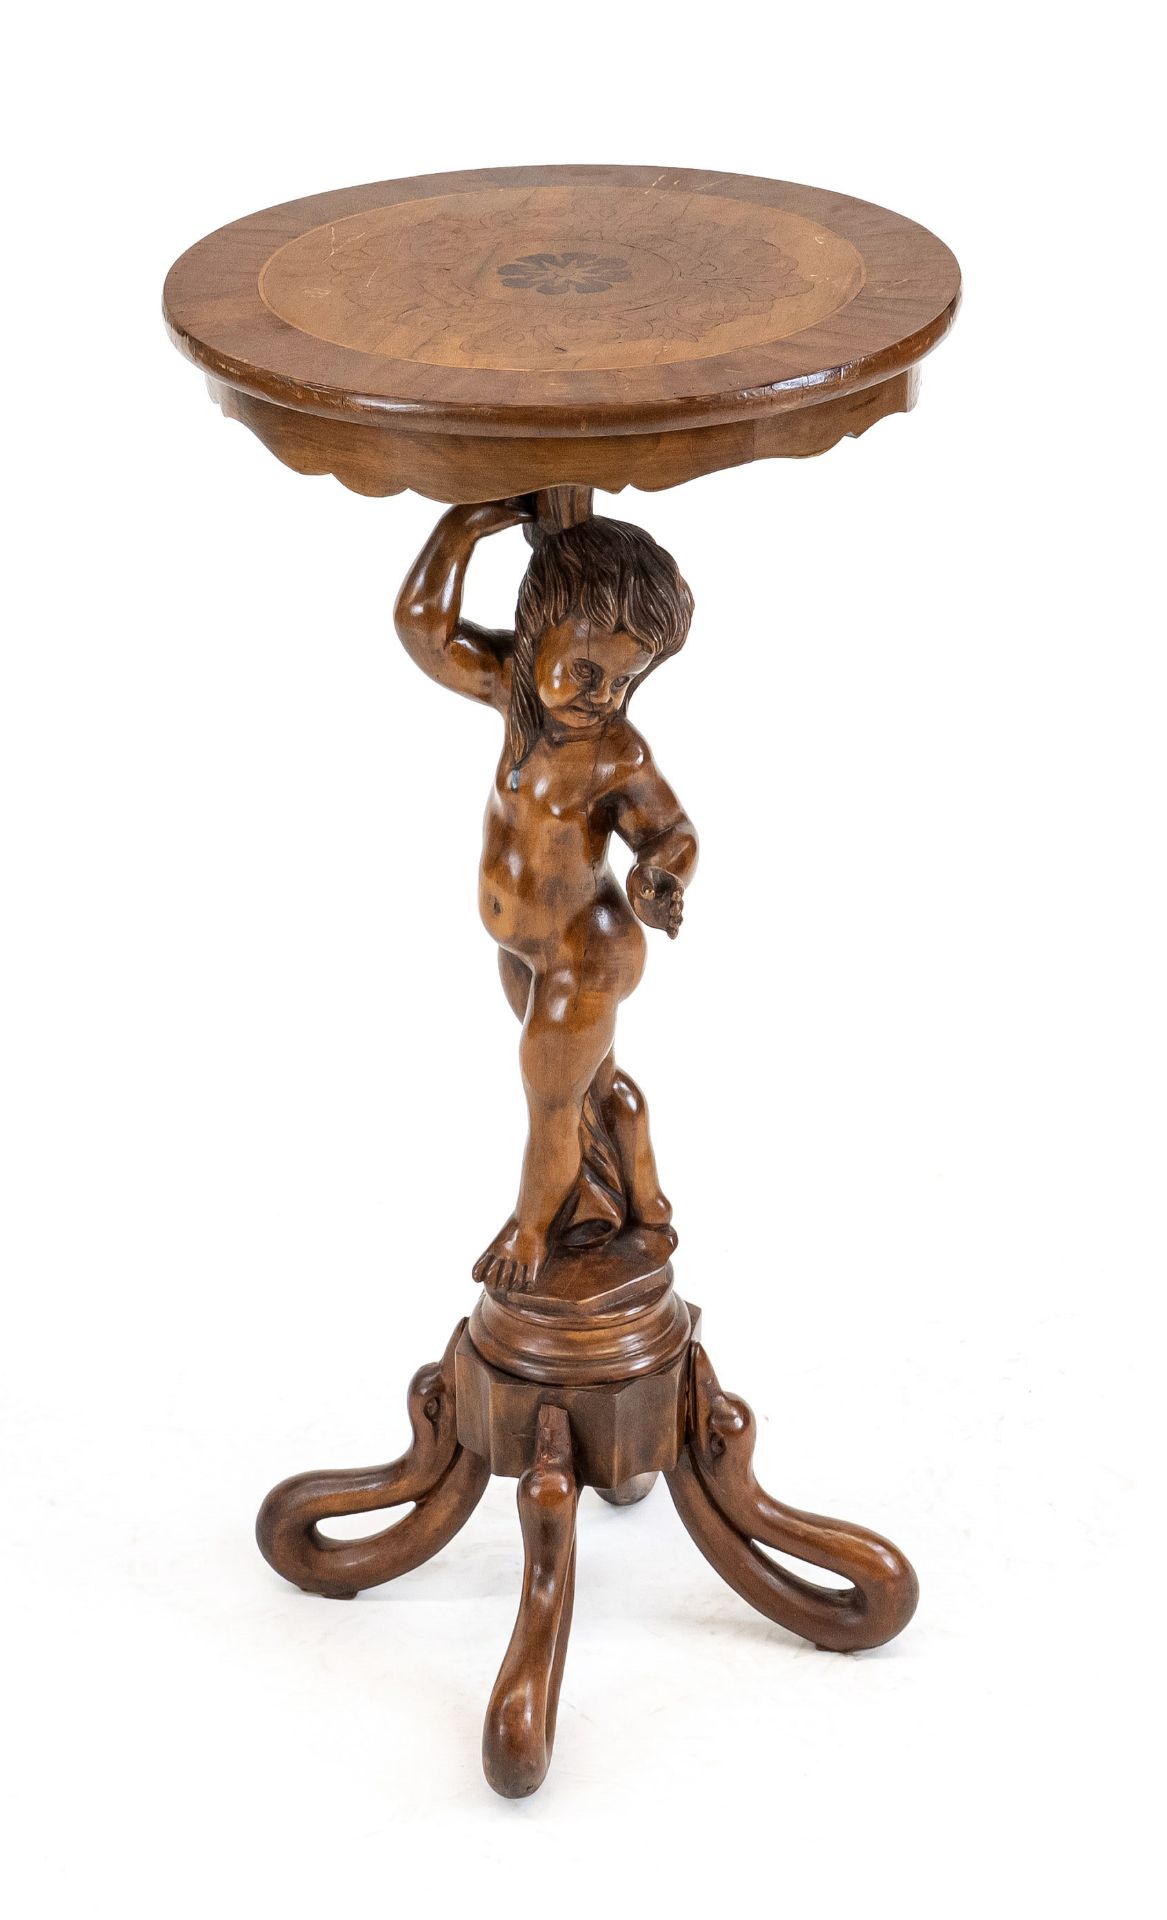 Figural side table circa 1970, walnut, top florally inlaid, h. 82, d.41 cm.